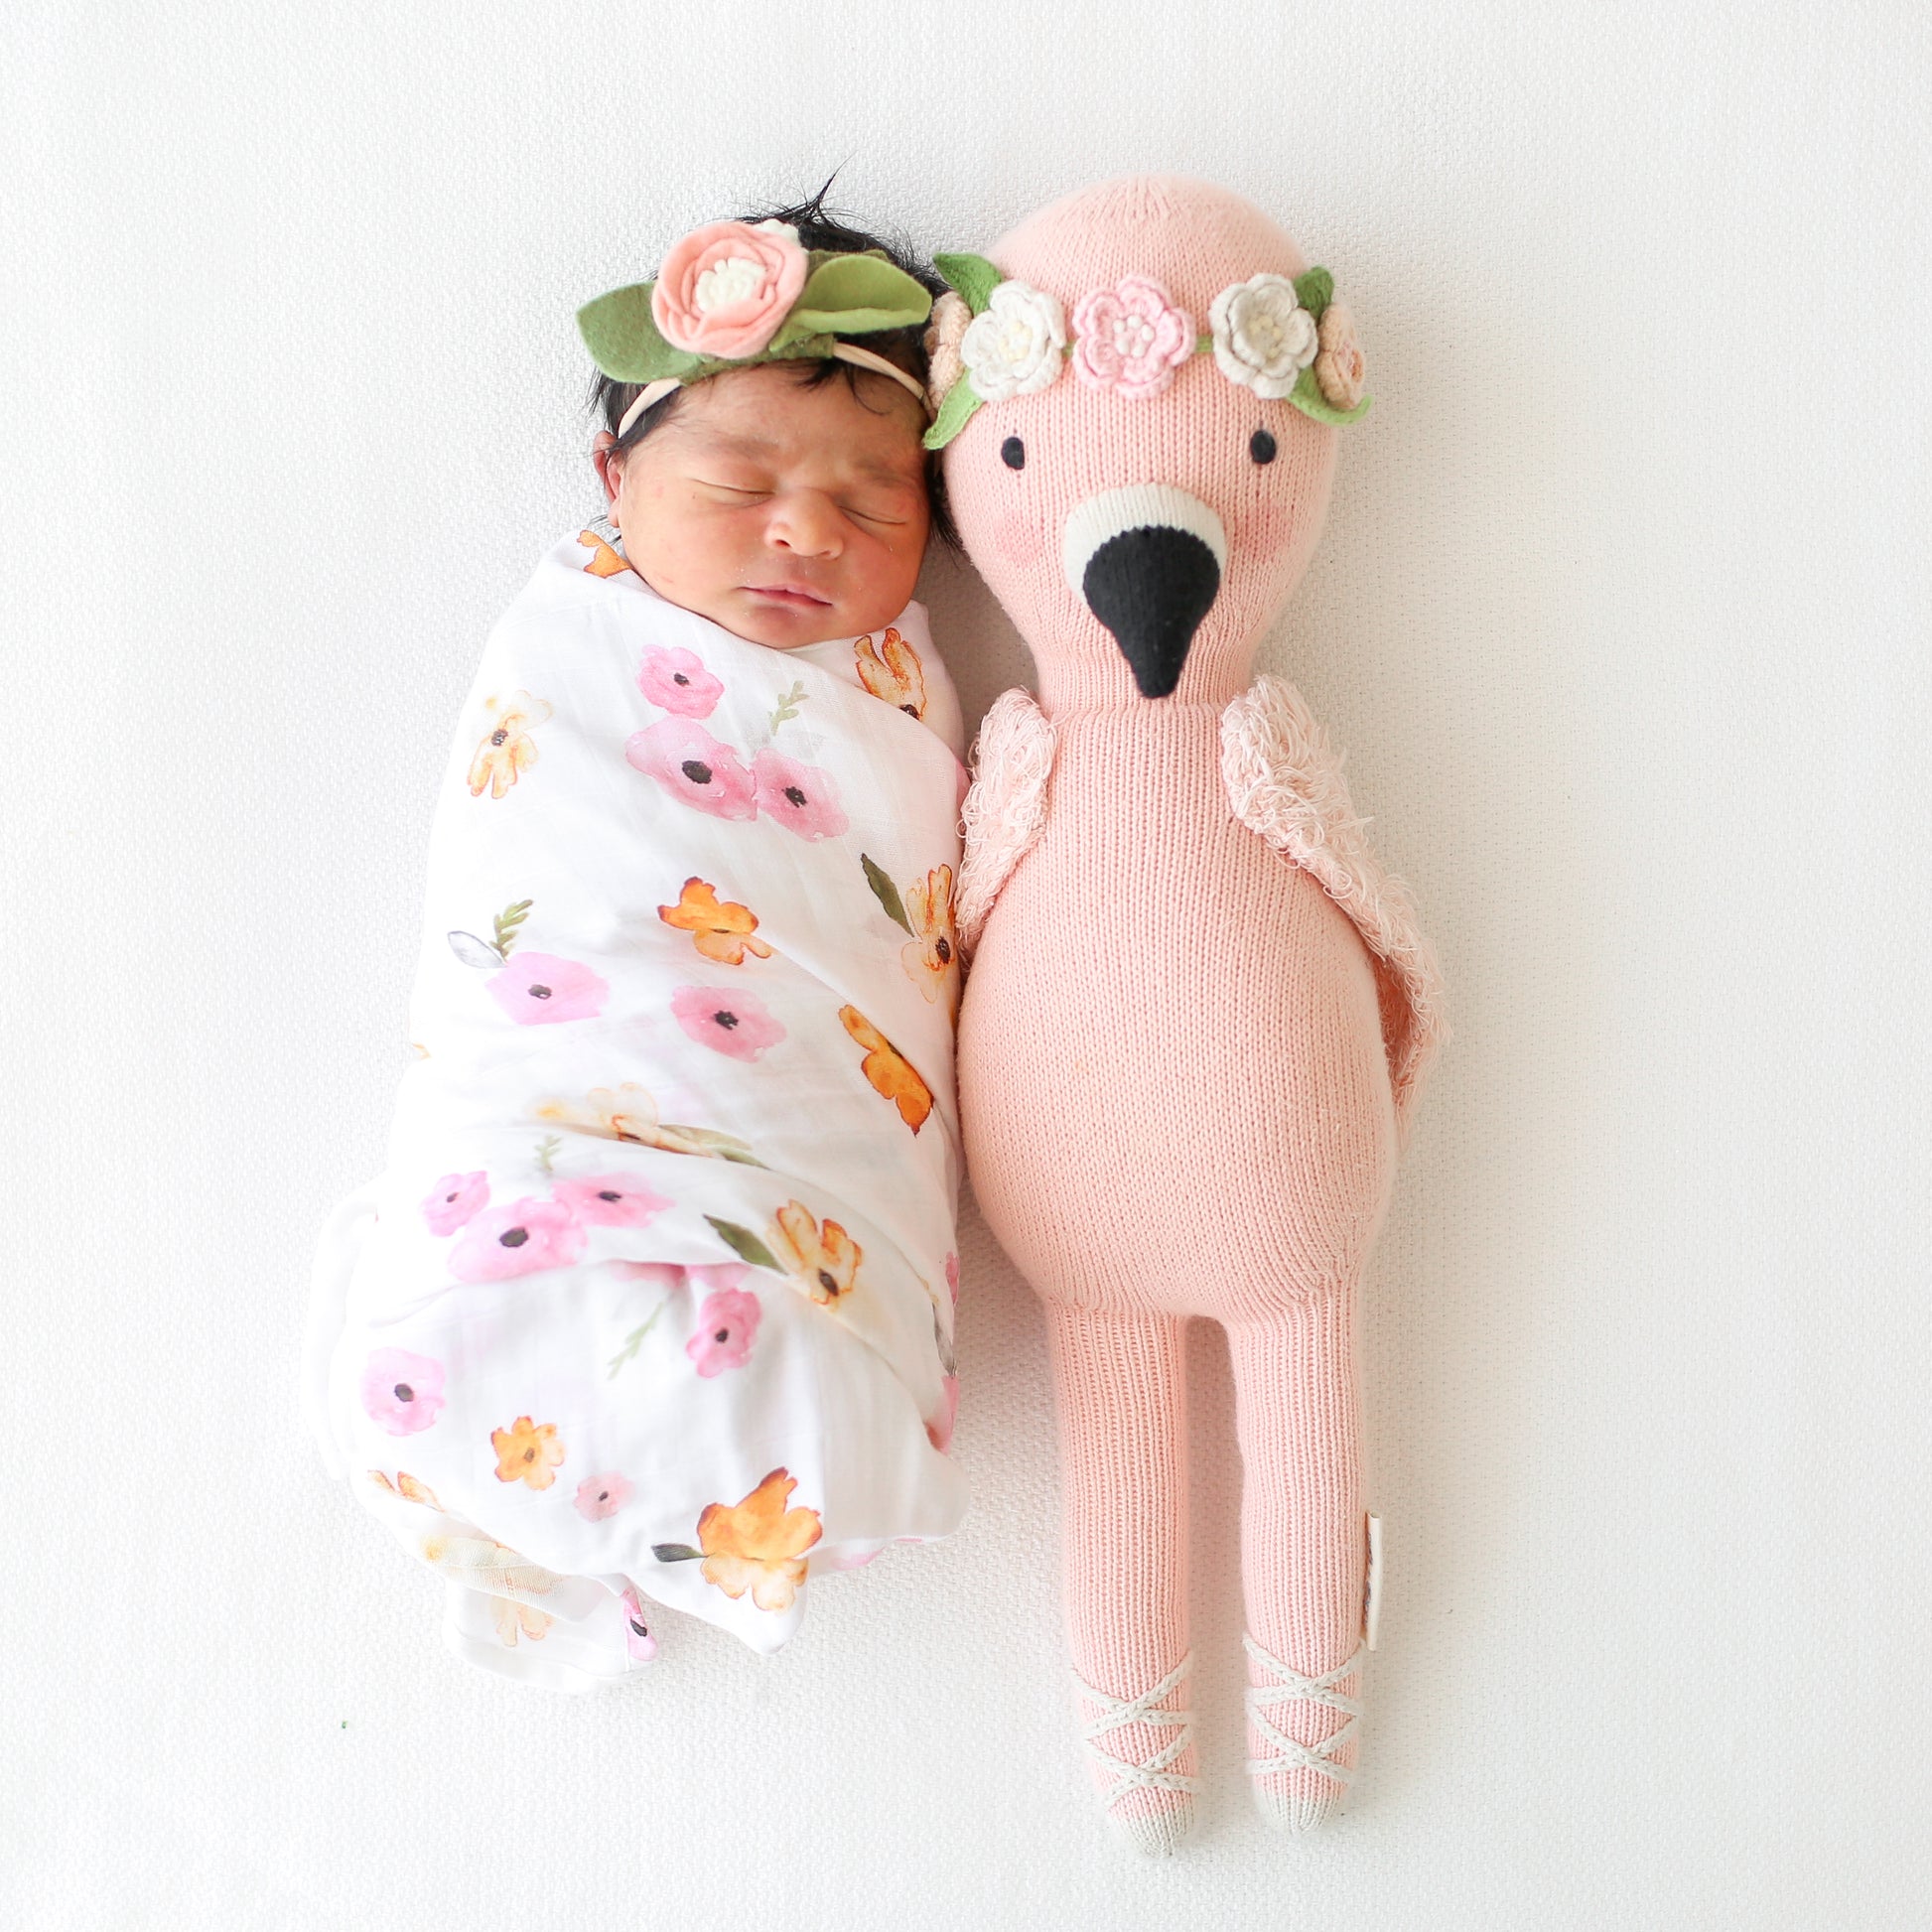 penelope the flamingo by cuddle + kind